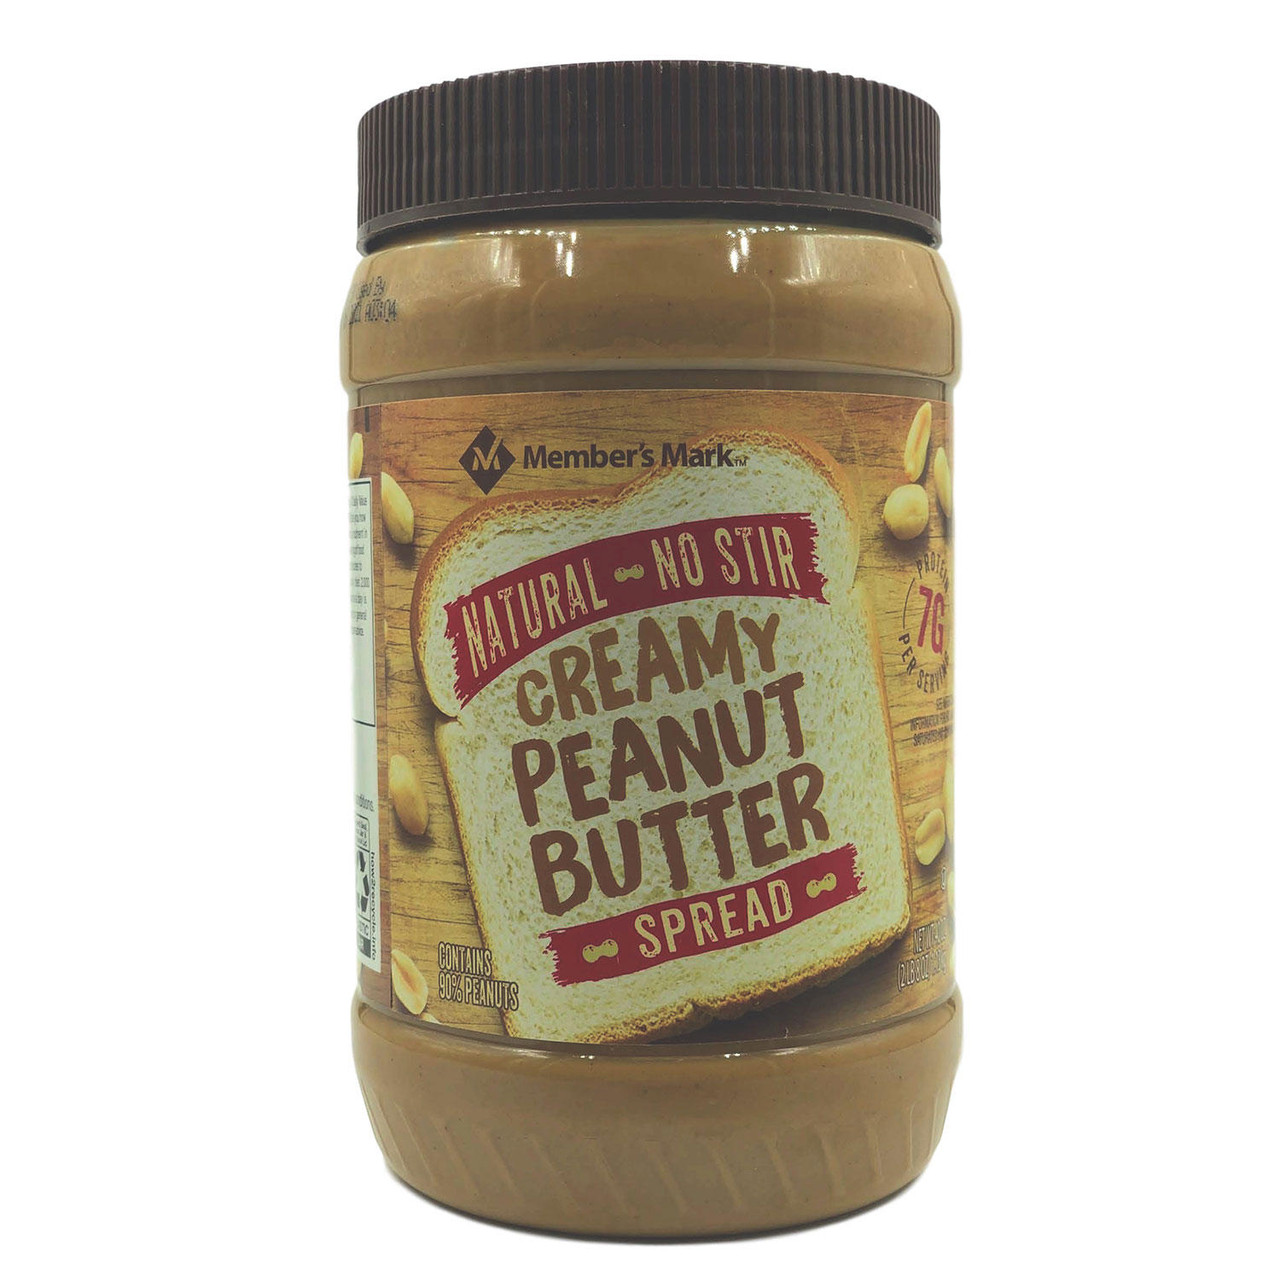 Member's Mark Natural Creamy Peanut Butter (40 oz., 2 pk.) - [From 36.00 - Choose pk Qty ] - *Ships from Miami